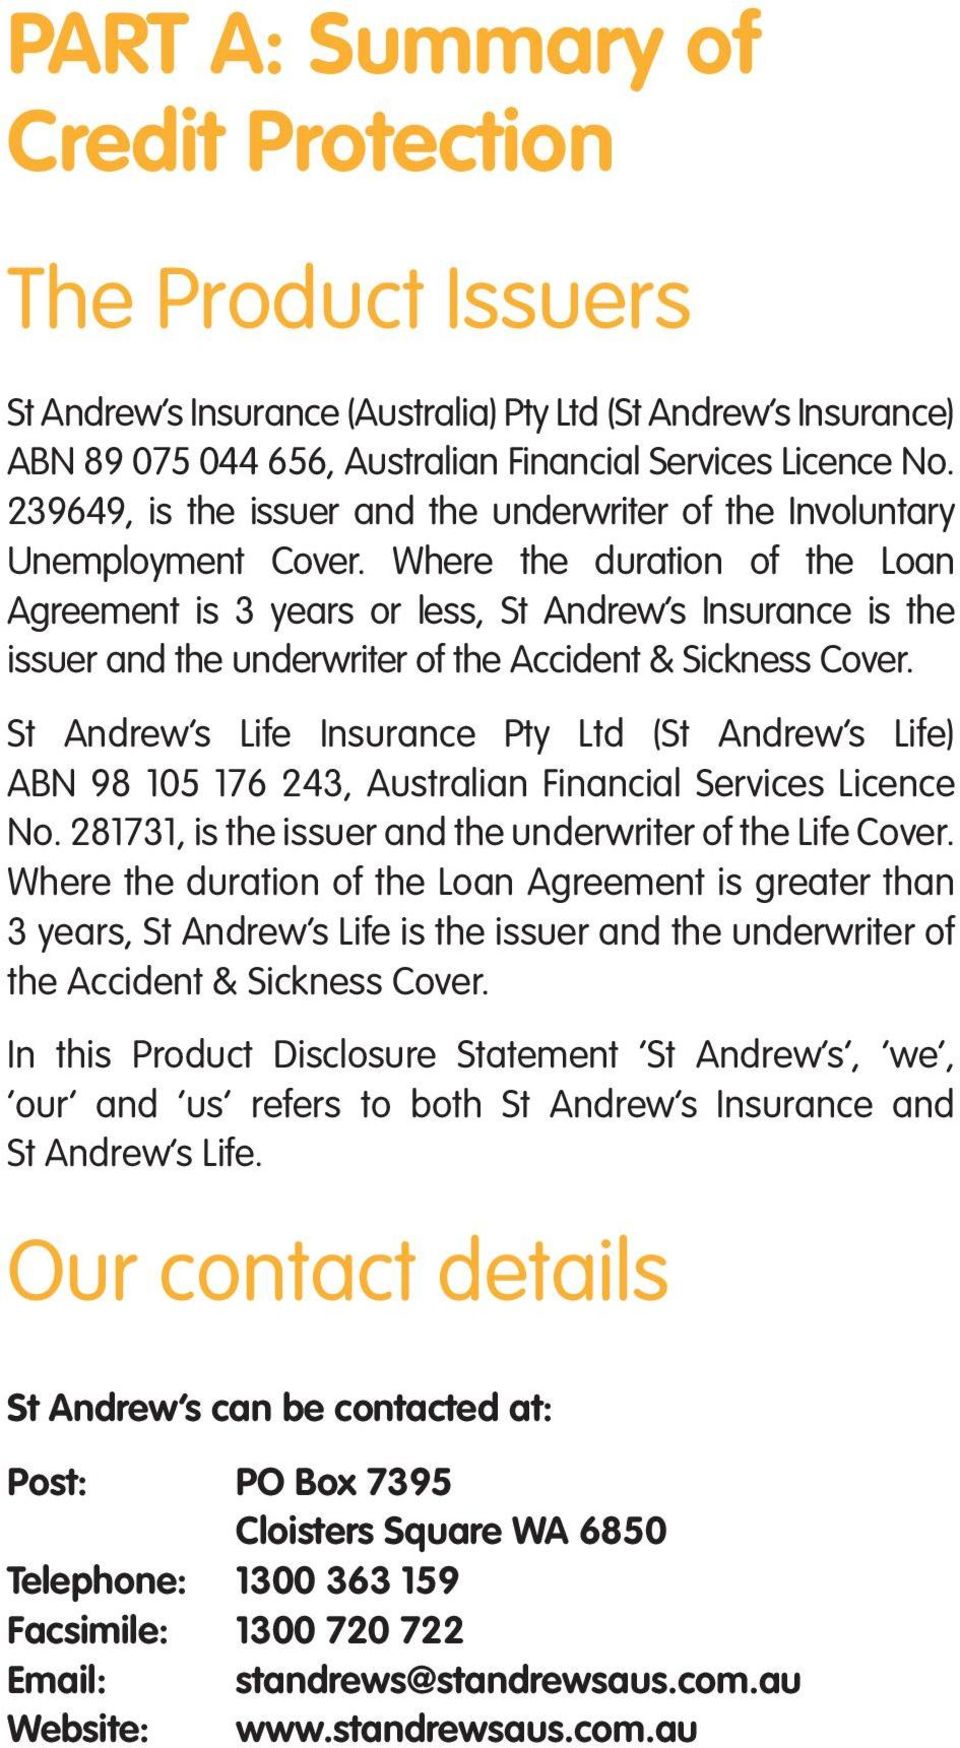 Where the duration of the Loan Agreement is 3 years or less, St Andrew s Insurance is the issuer and the underwriter of the Accident & Sickness Cover.